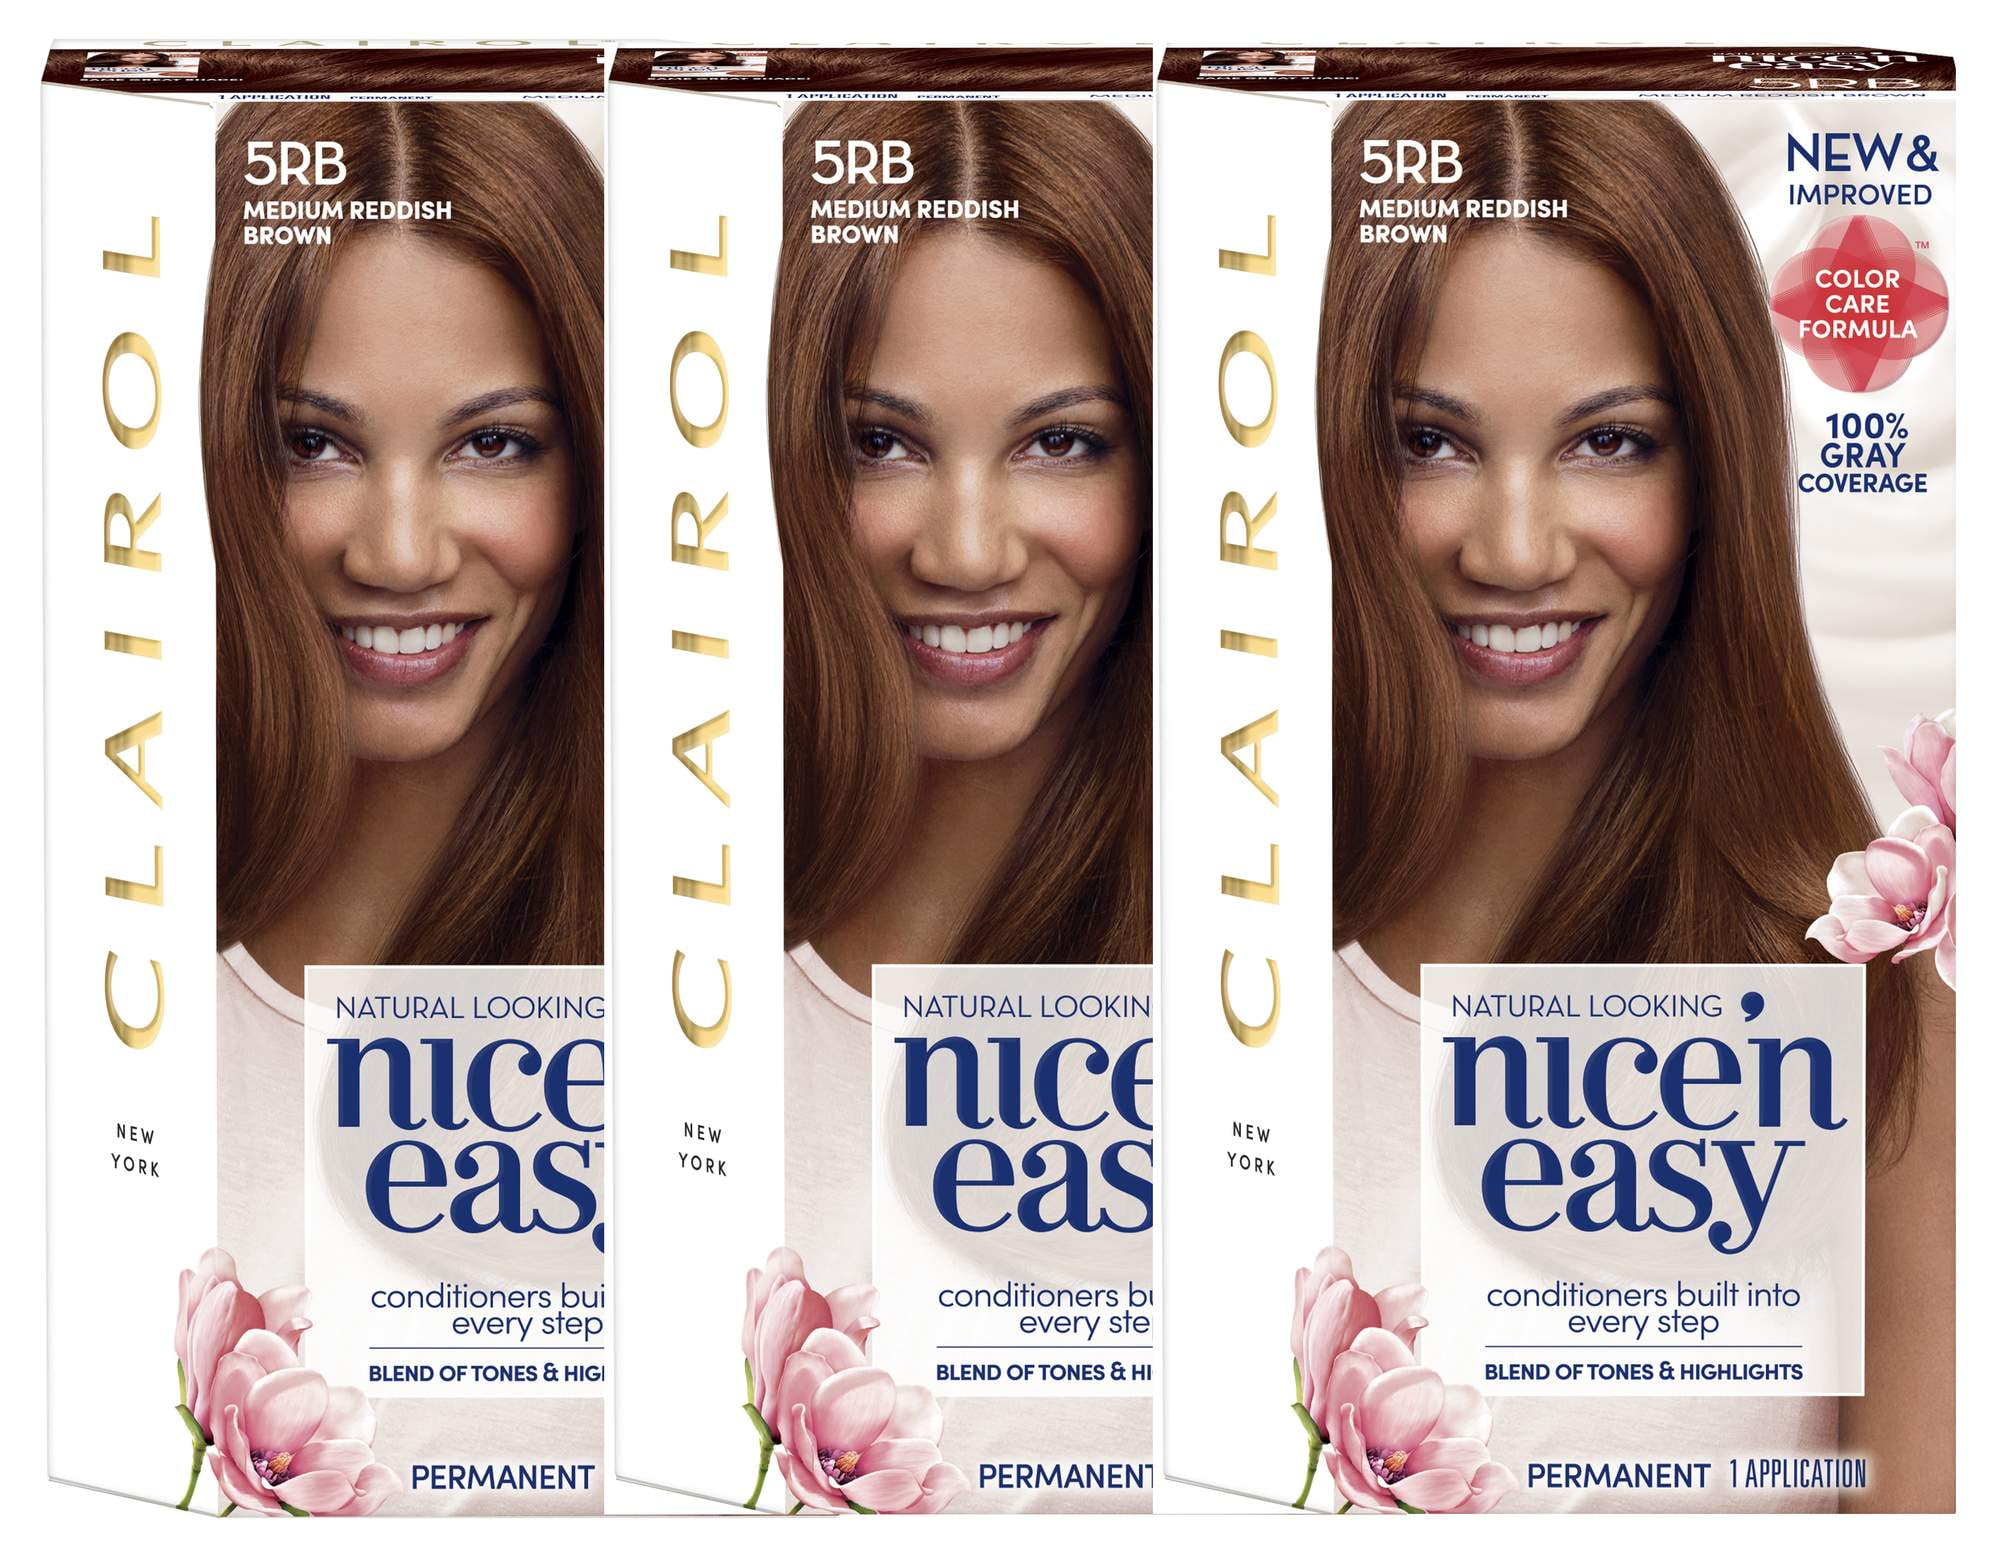 4. Clairol Nice'n Easy Permanent Hair Color, Natural Lightest Blonde - wide 5